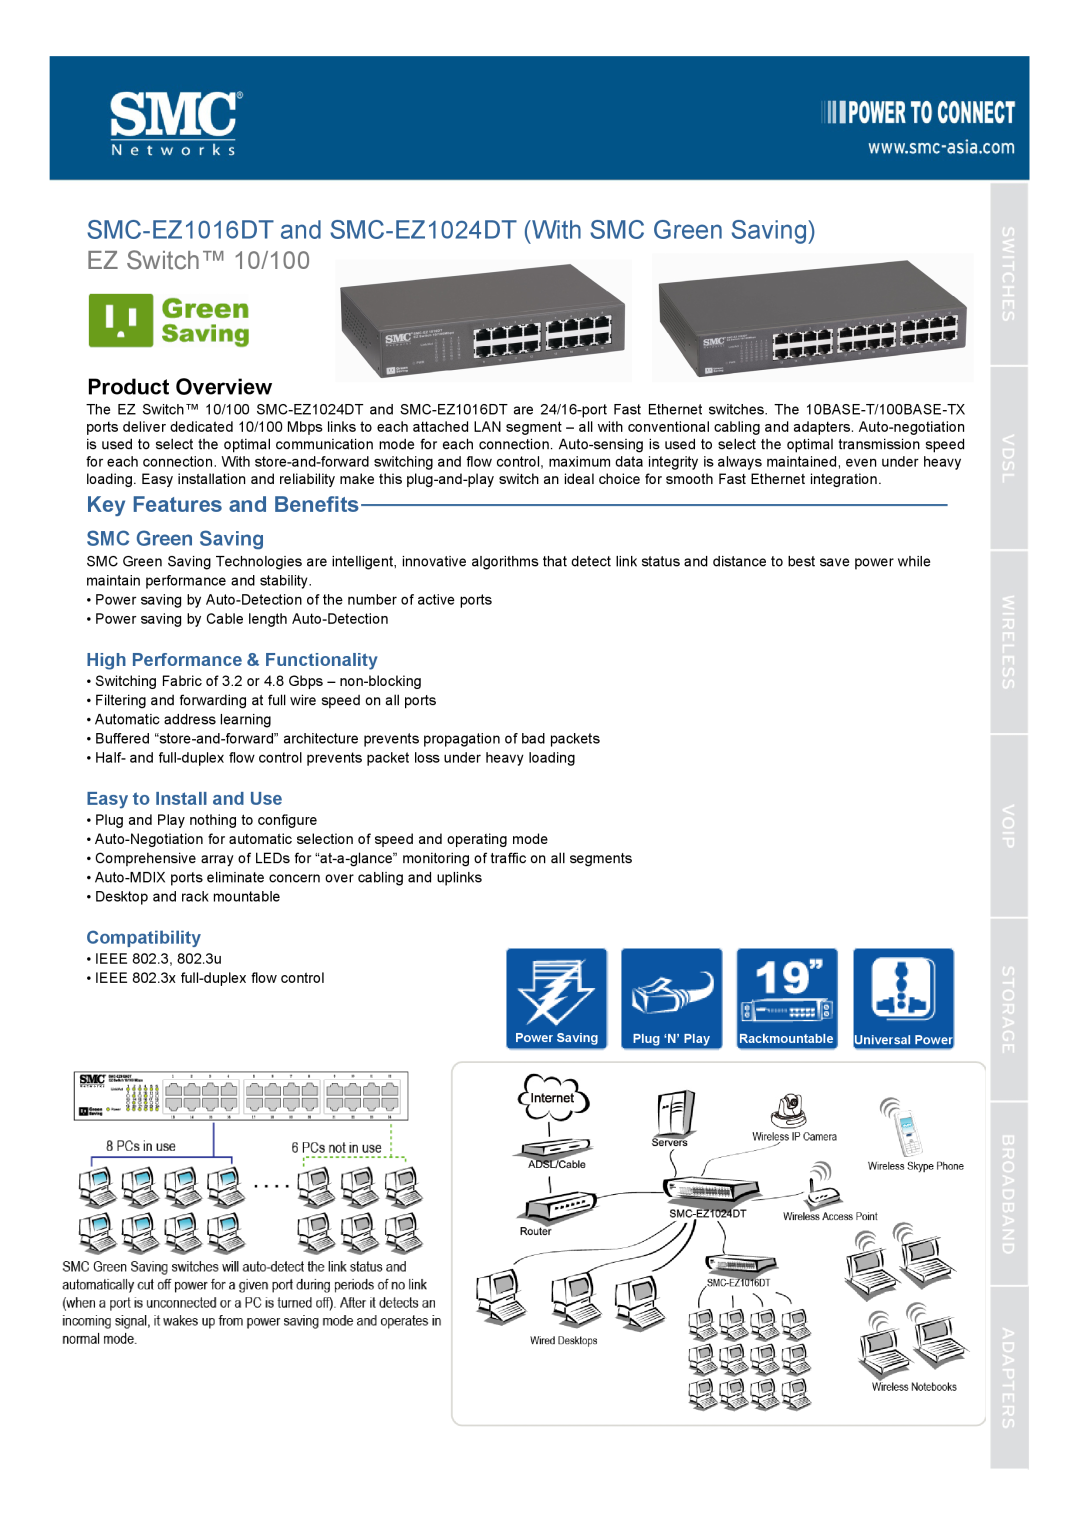 SMC Networks manual Key Features and Benefits, SMC-EZ1016DT and SMC-EZ1024DT With SMC Green Saving, EZ Switch 10/100 